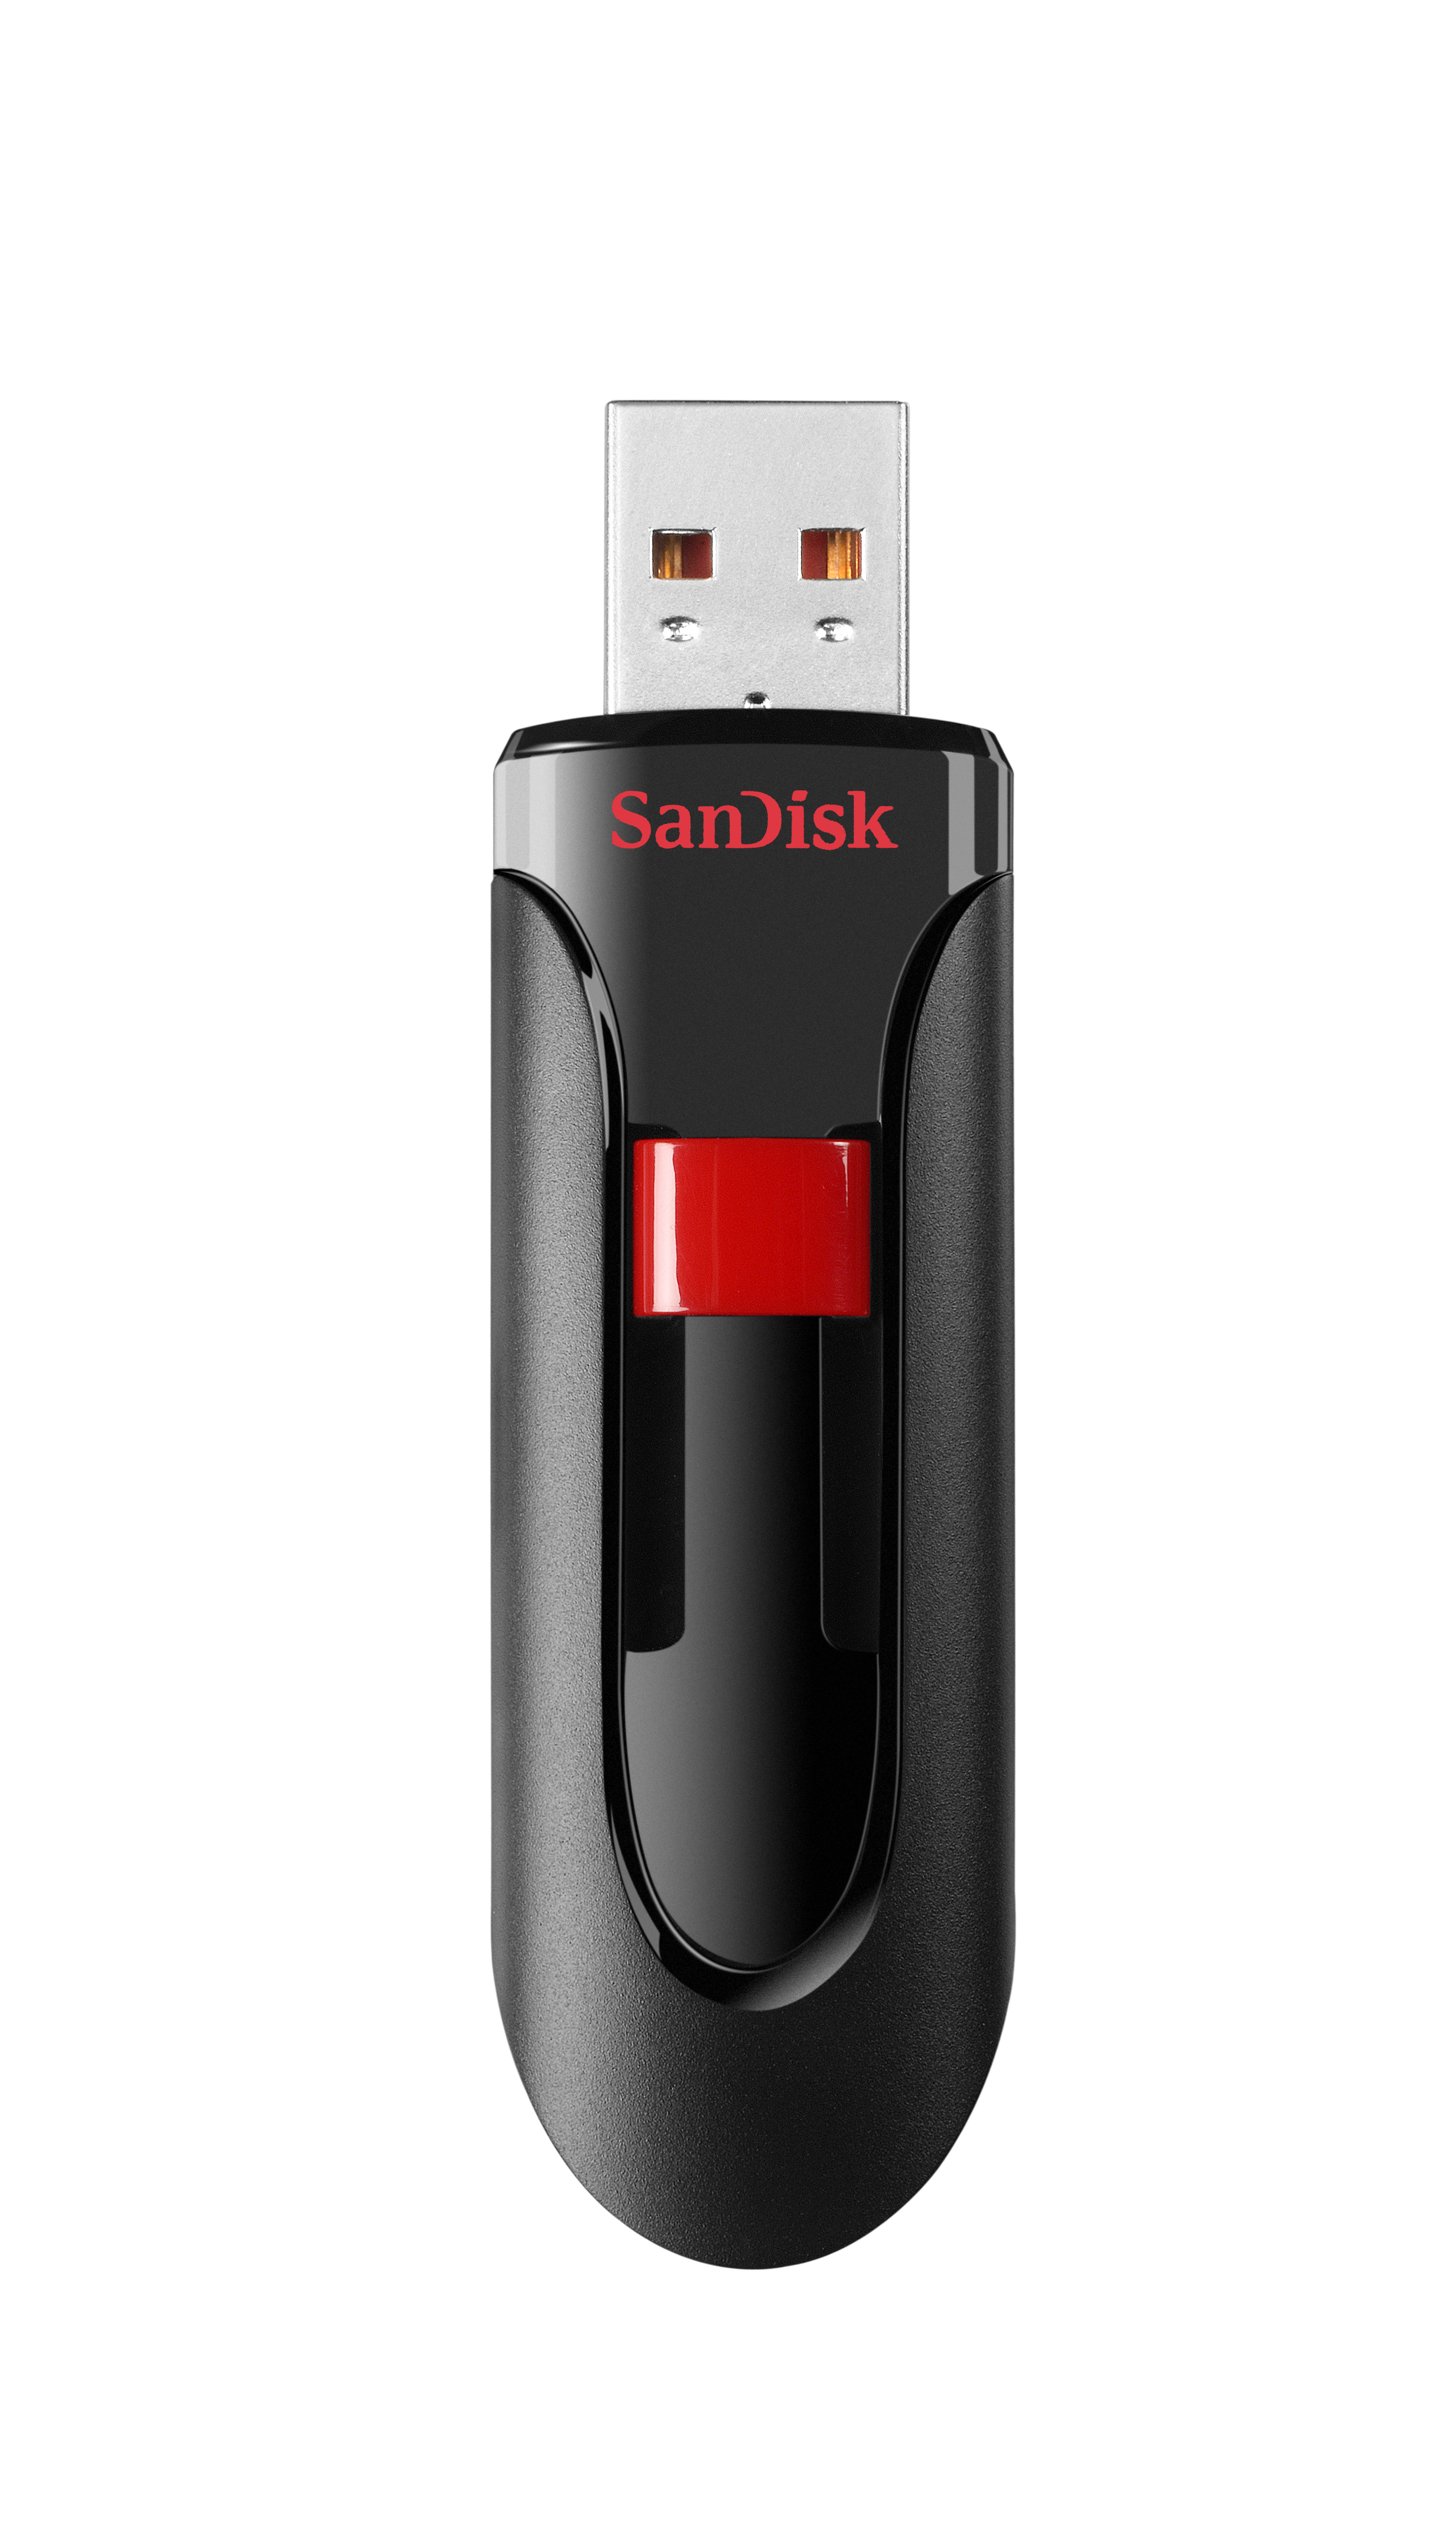 SanDisk 64GB Cruzer Glide USB 2.0 Flash Drive 2 Pack - SDCZ60-064G-AW46TW - image 5 of 8